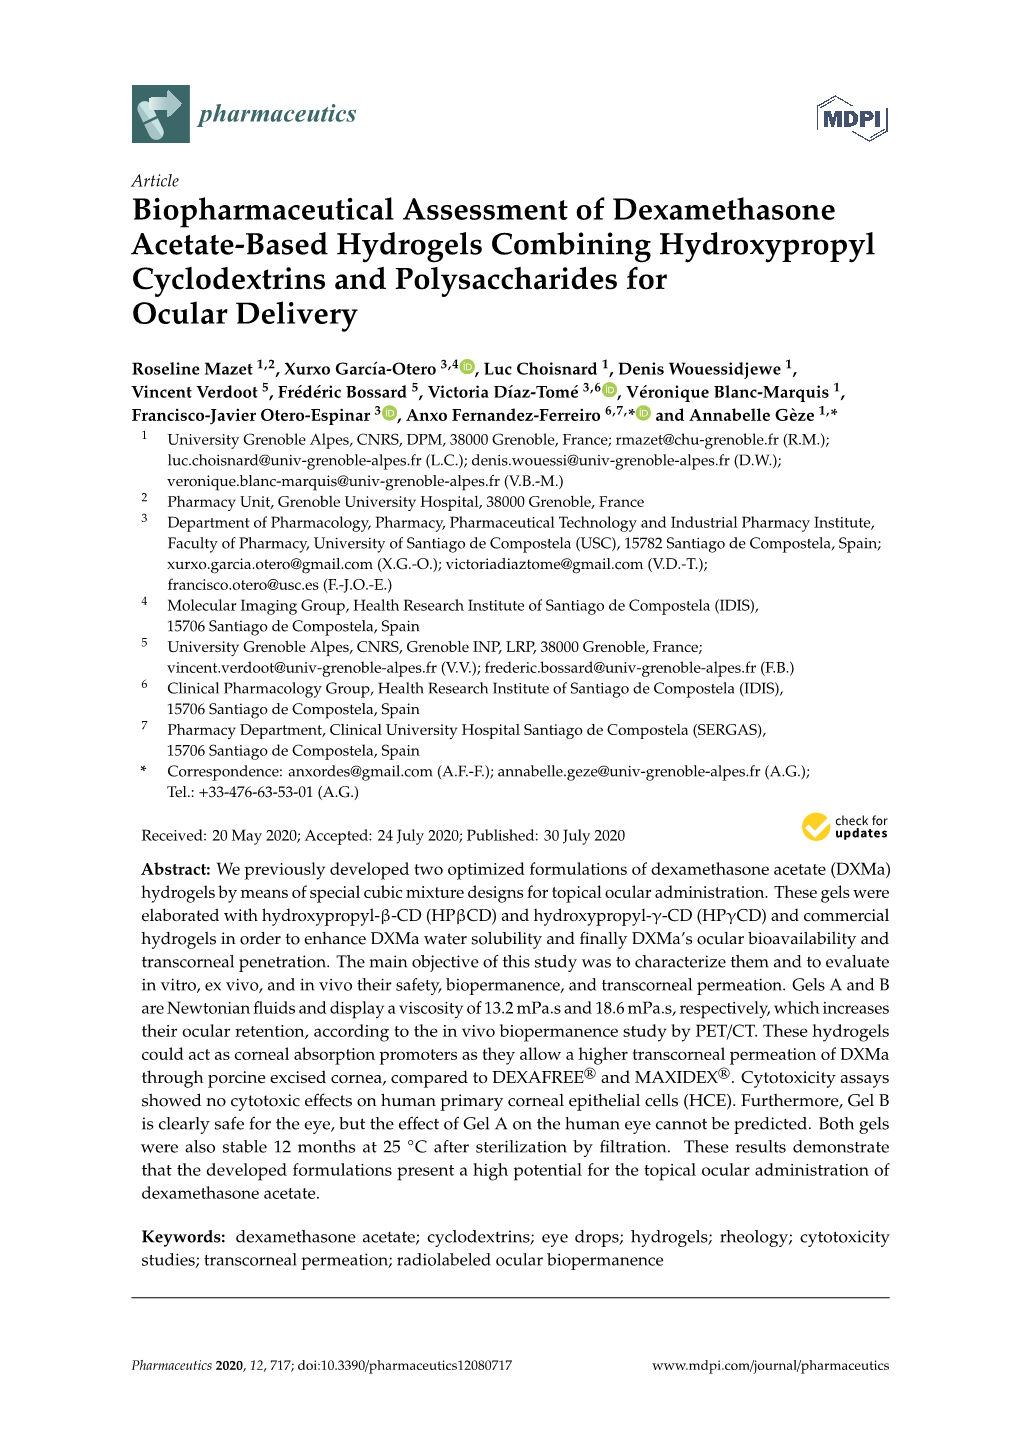 Biopharmaceutical Assessment of Dexamethasone Acetate-Based Hydrogels Combining Hydroxypropyl Cyclodextrins and Polysaccharides for Ocular Delivery